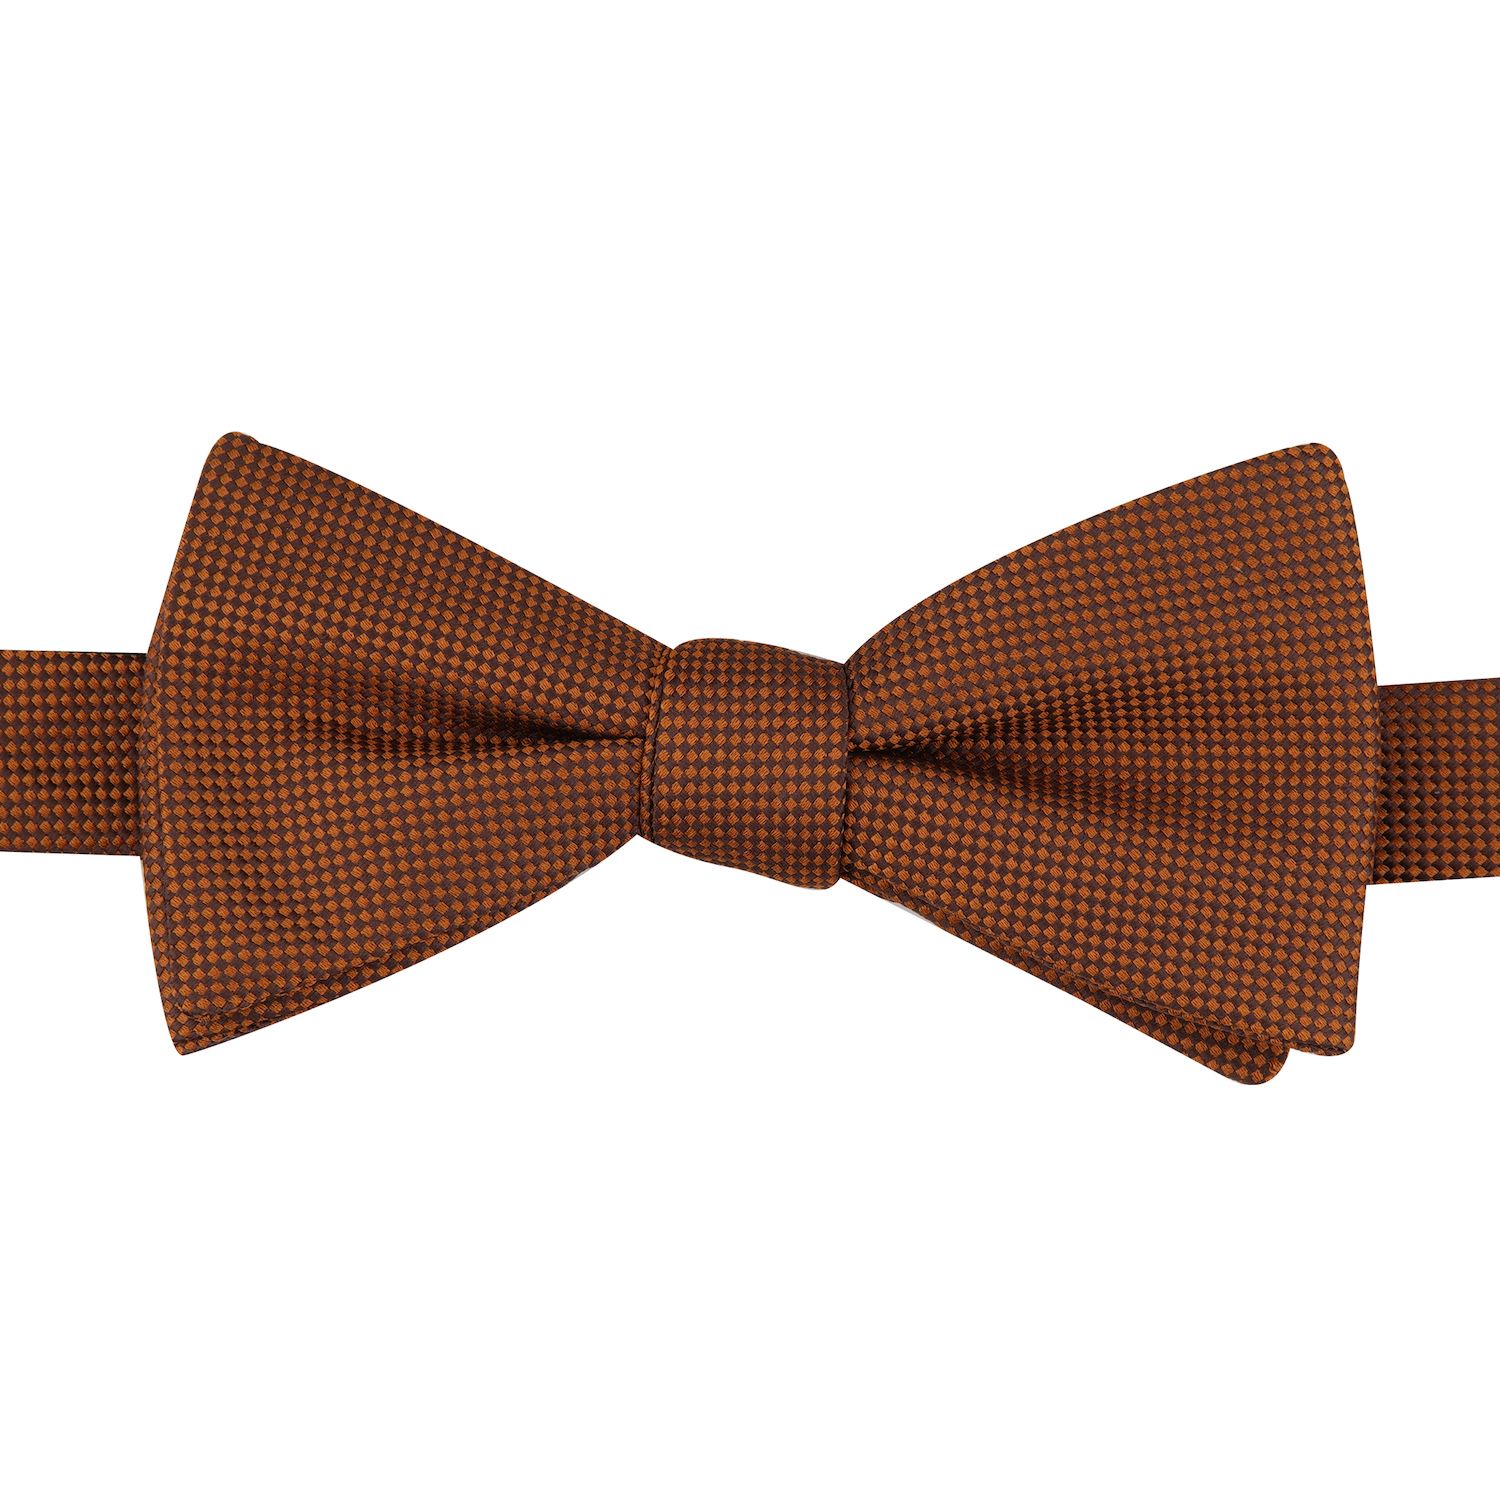 A classic patterned bow tie is the best of both worlds: it's on trend, and also old school.